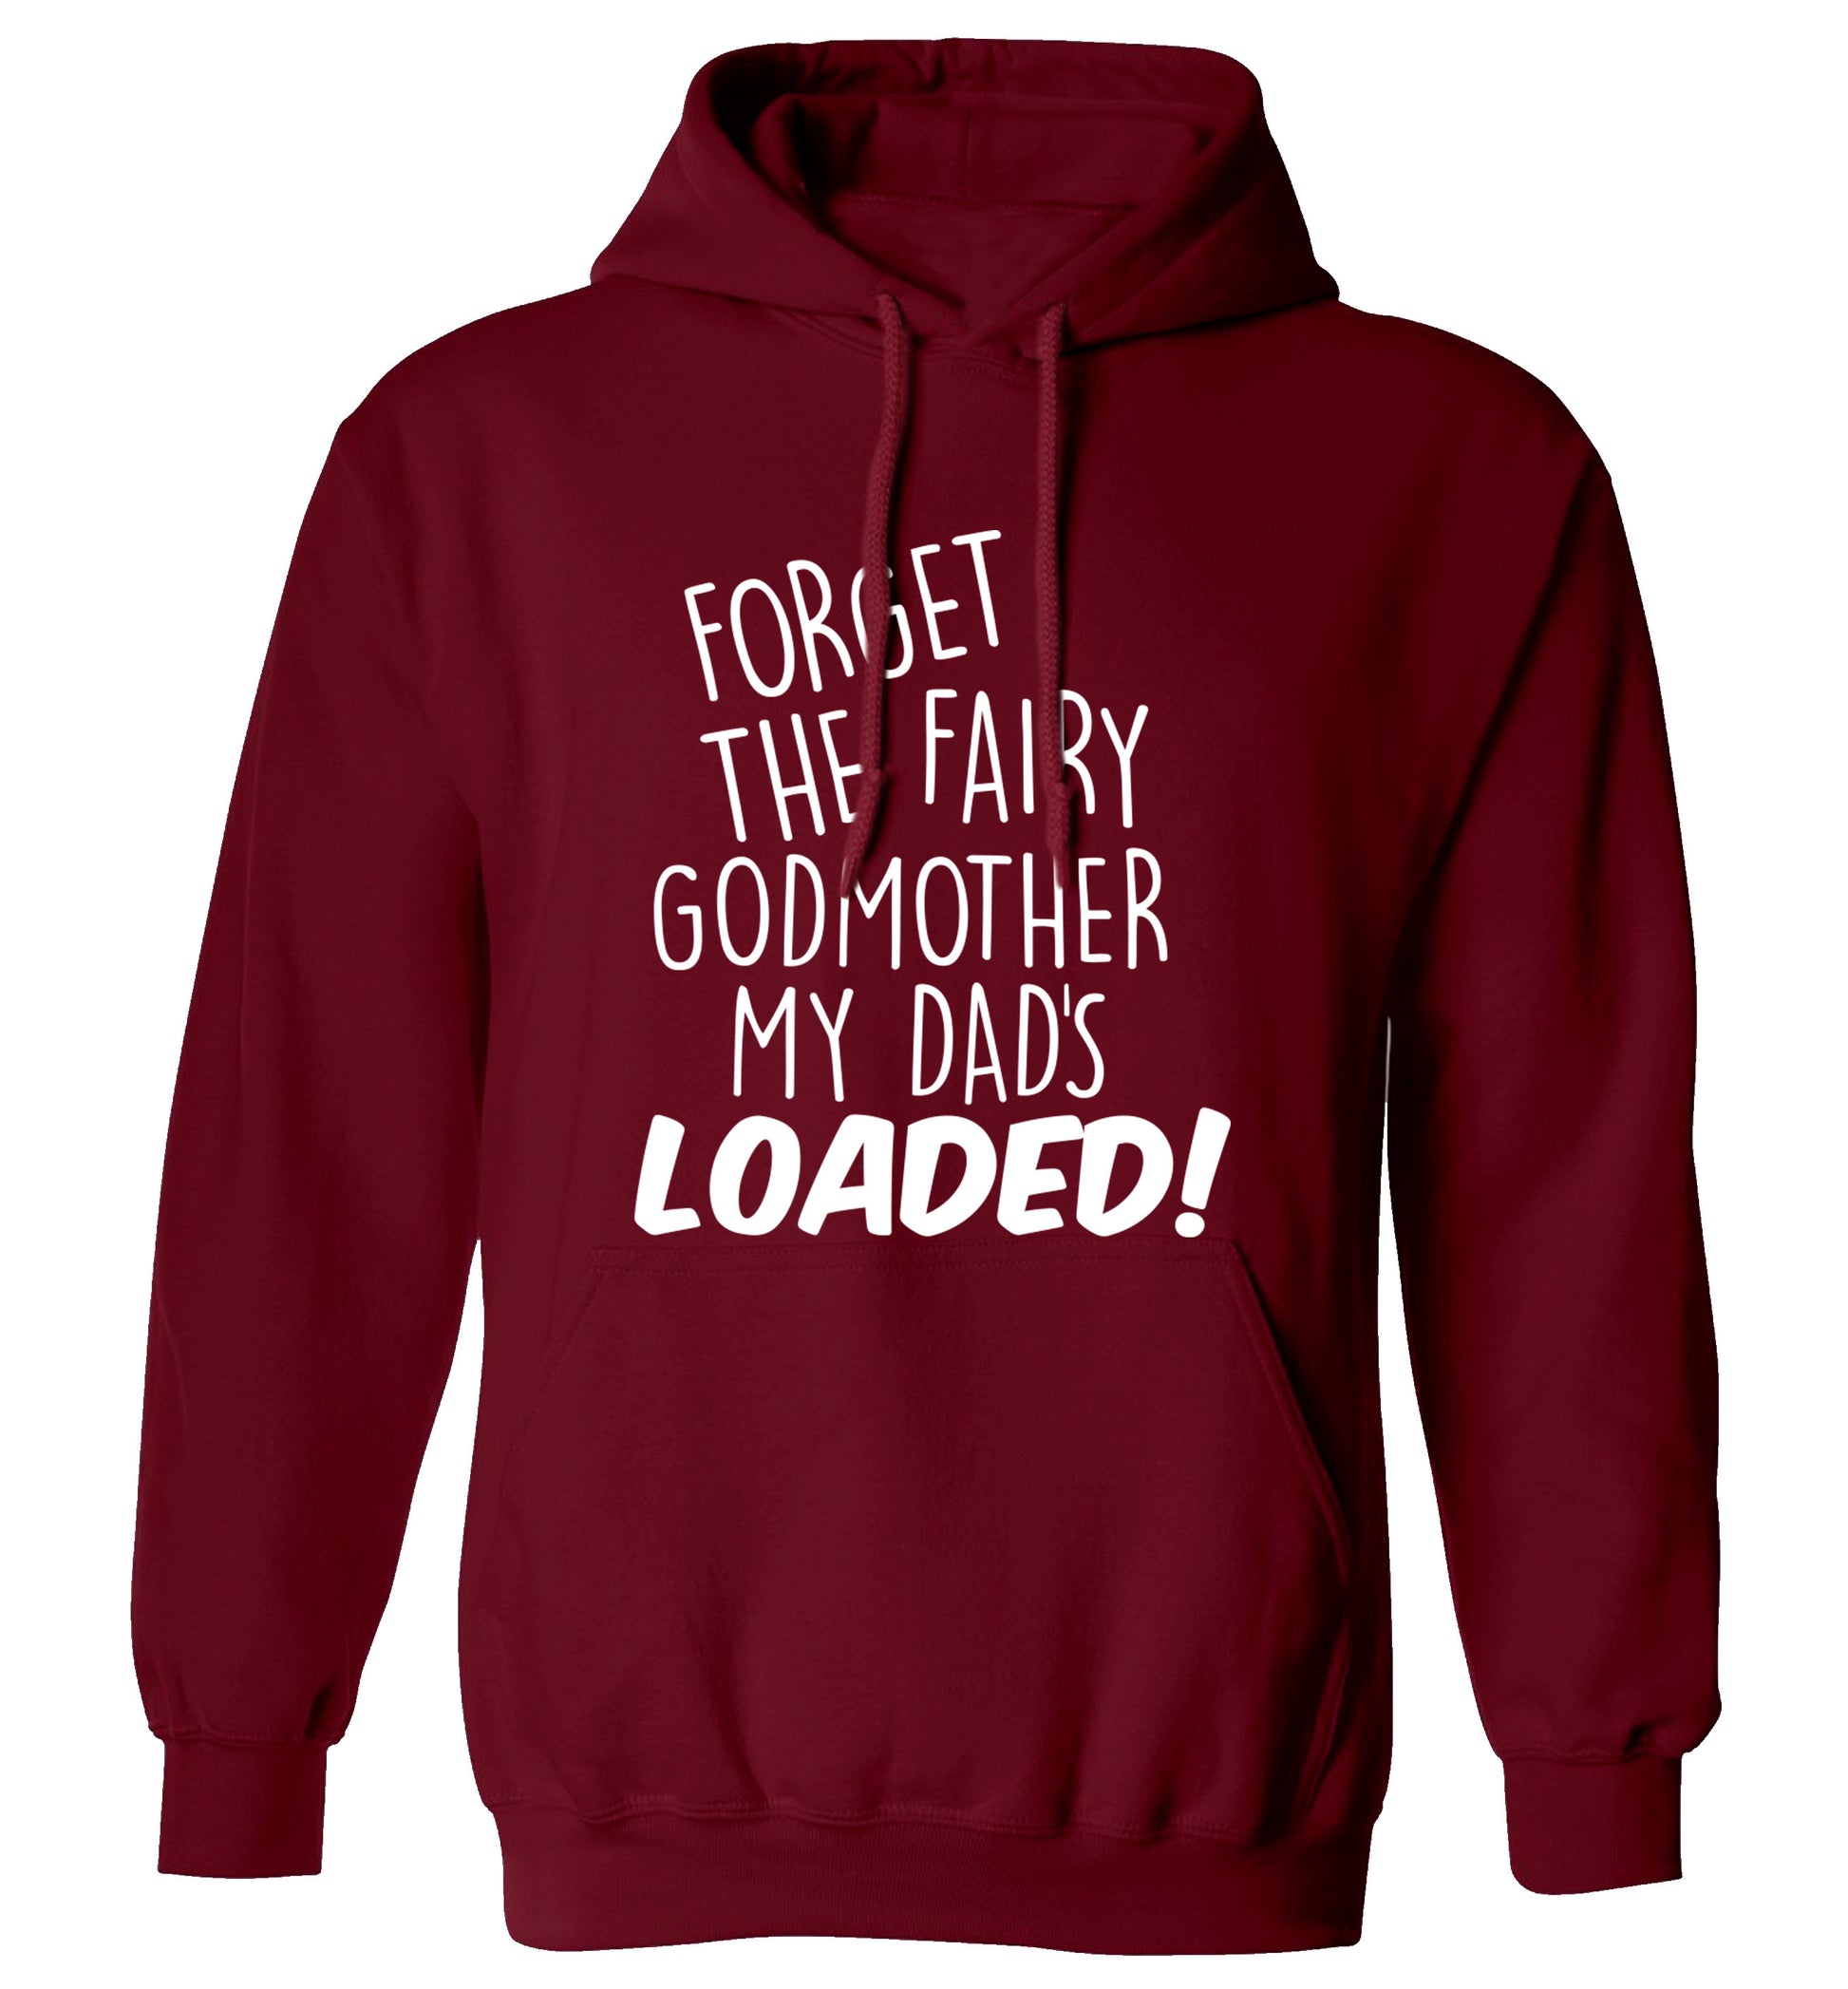 Forget the fairy godmother my dad's loaded adults unisex maroon hoodie 2XL